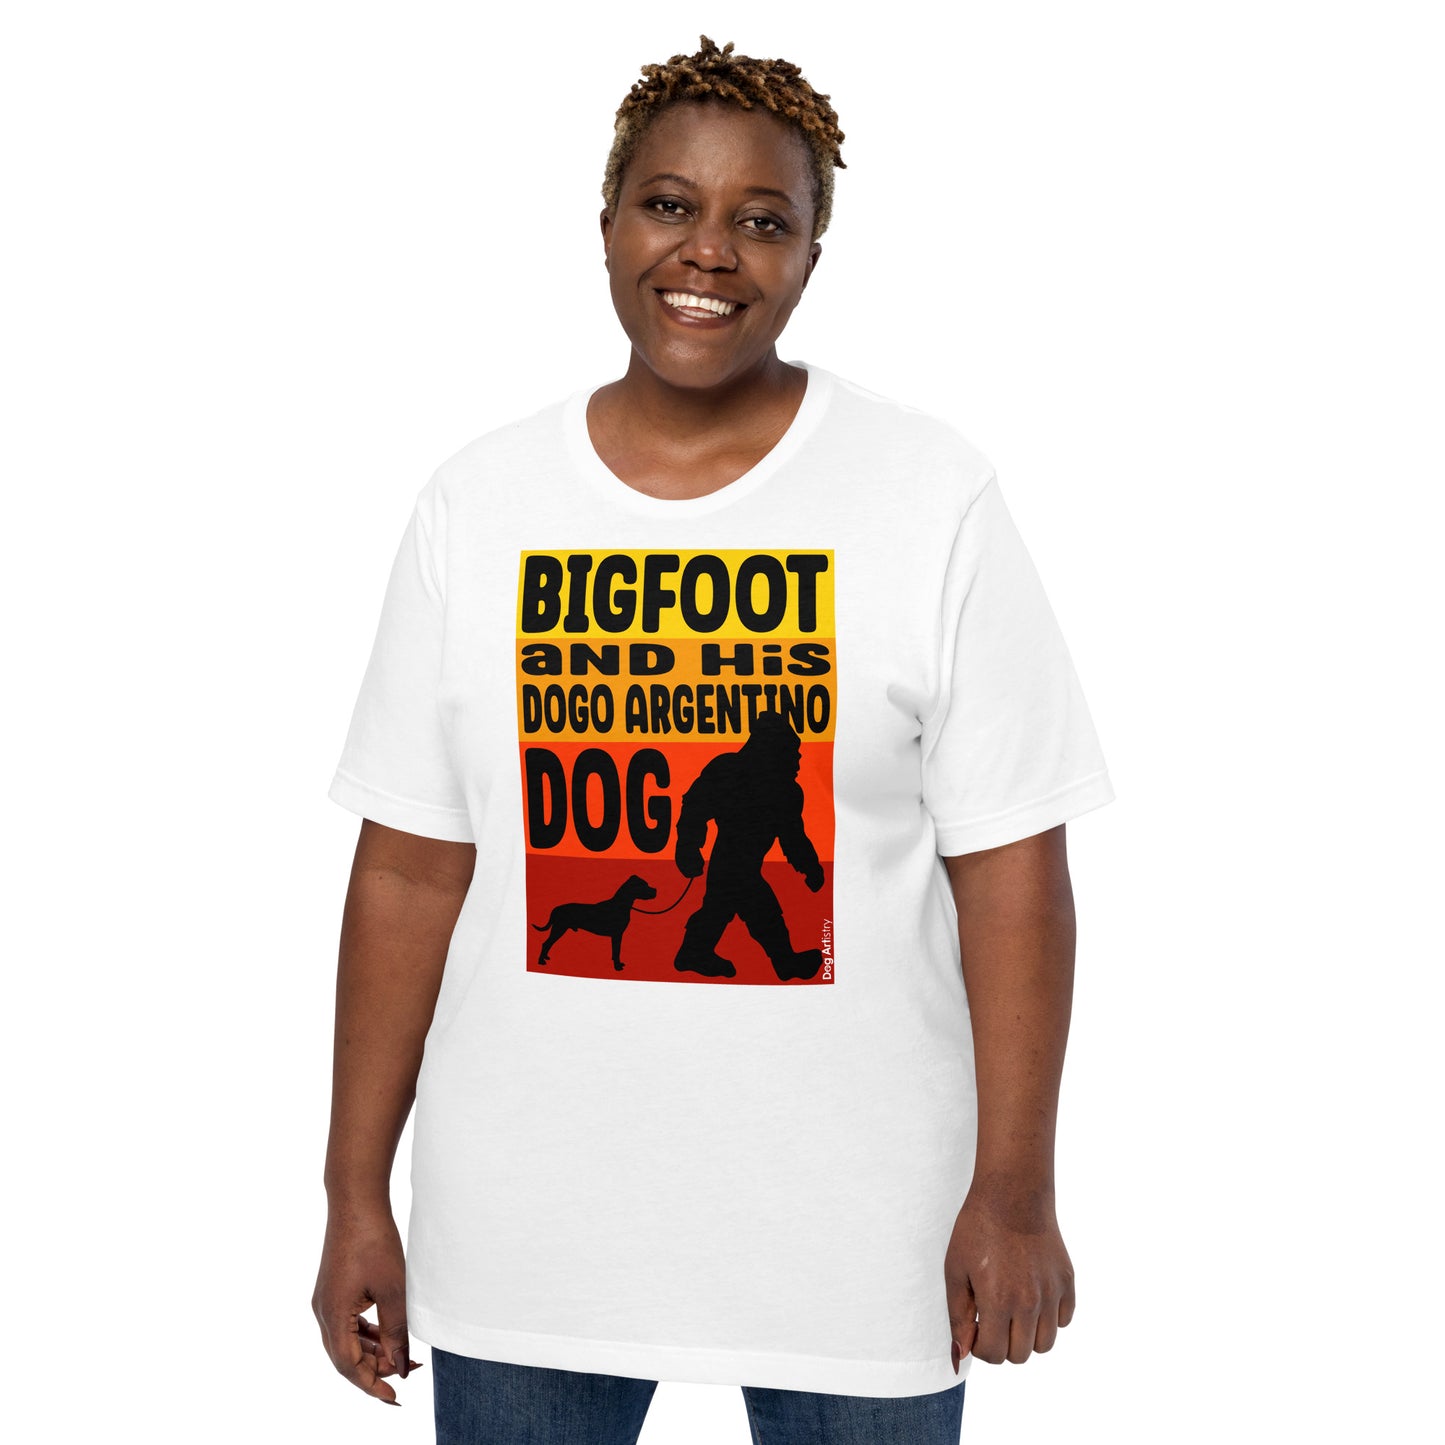 Bigfoot and his Dogo Argentino dog unisex white t-shirt by Dog Artistry.